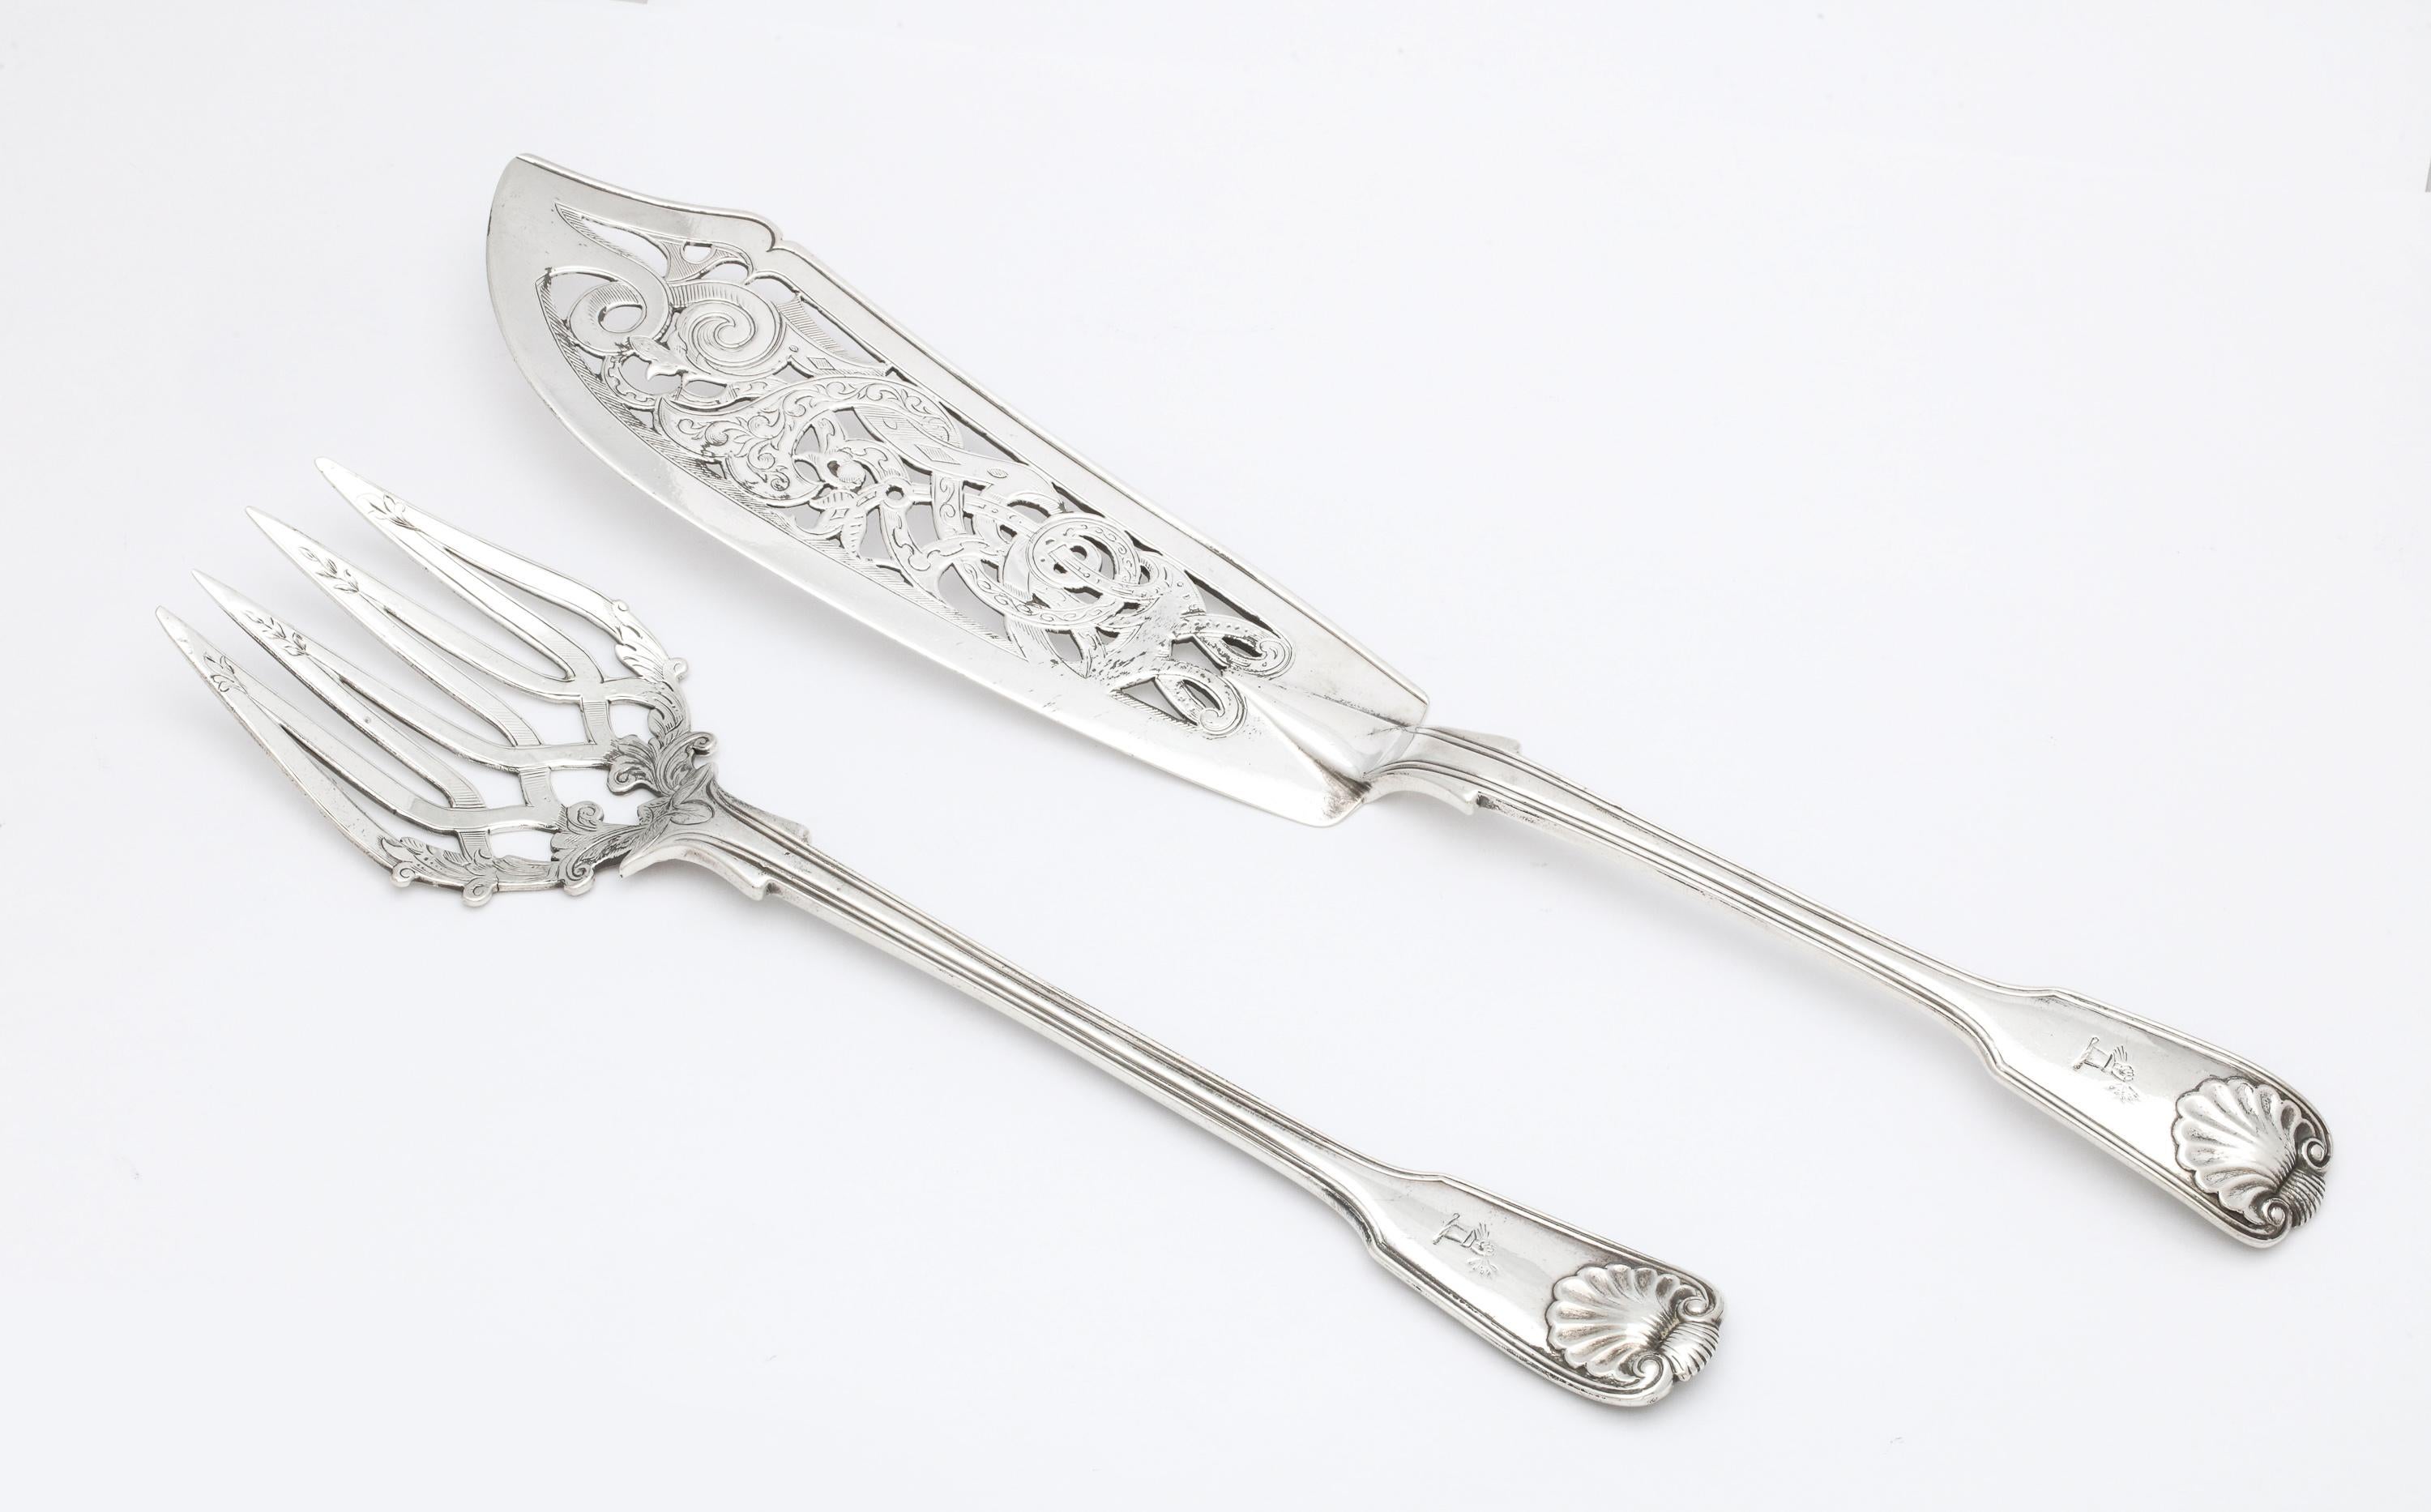 Victorian, sterling silver fish serving set, London, 1855, George Adams - maker. Handles each have an armorial of an extended arm clutching a bunch of arrows. Shell pattern on handles. Knife measures 12 3/4 inches long x 2 inches wide (at widest